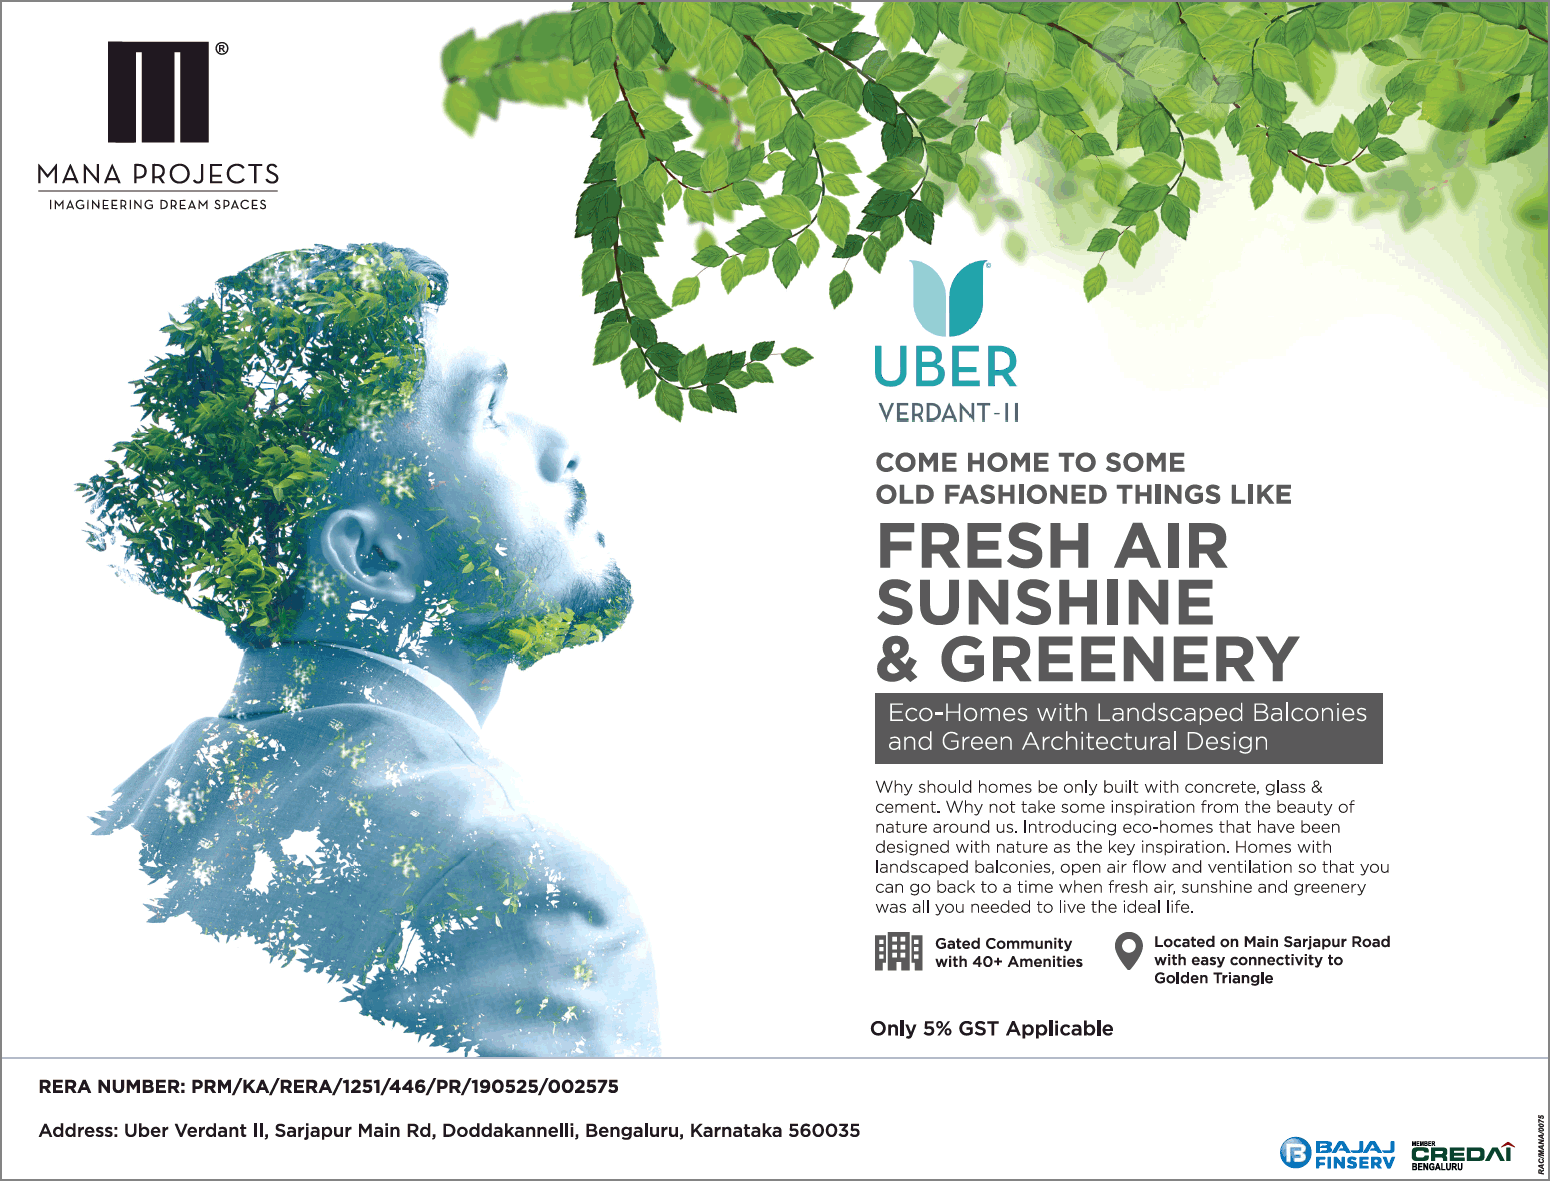 Eco-homes with landscaped balconies and green architectural design at Mana Uber Verdant 2, Bangalore